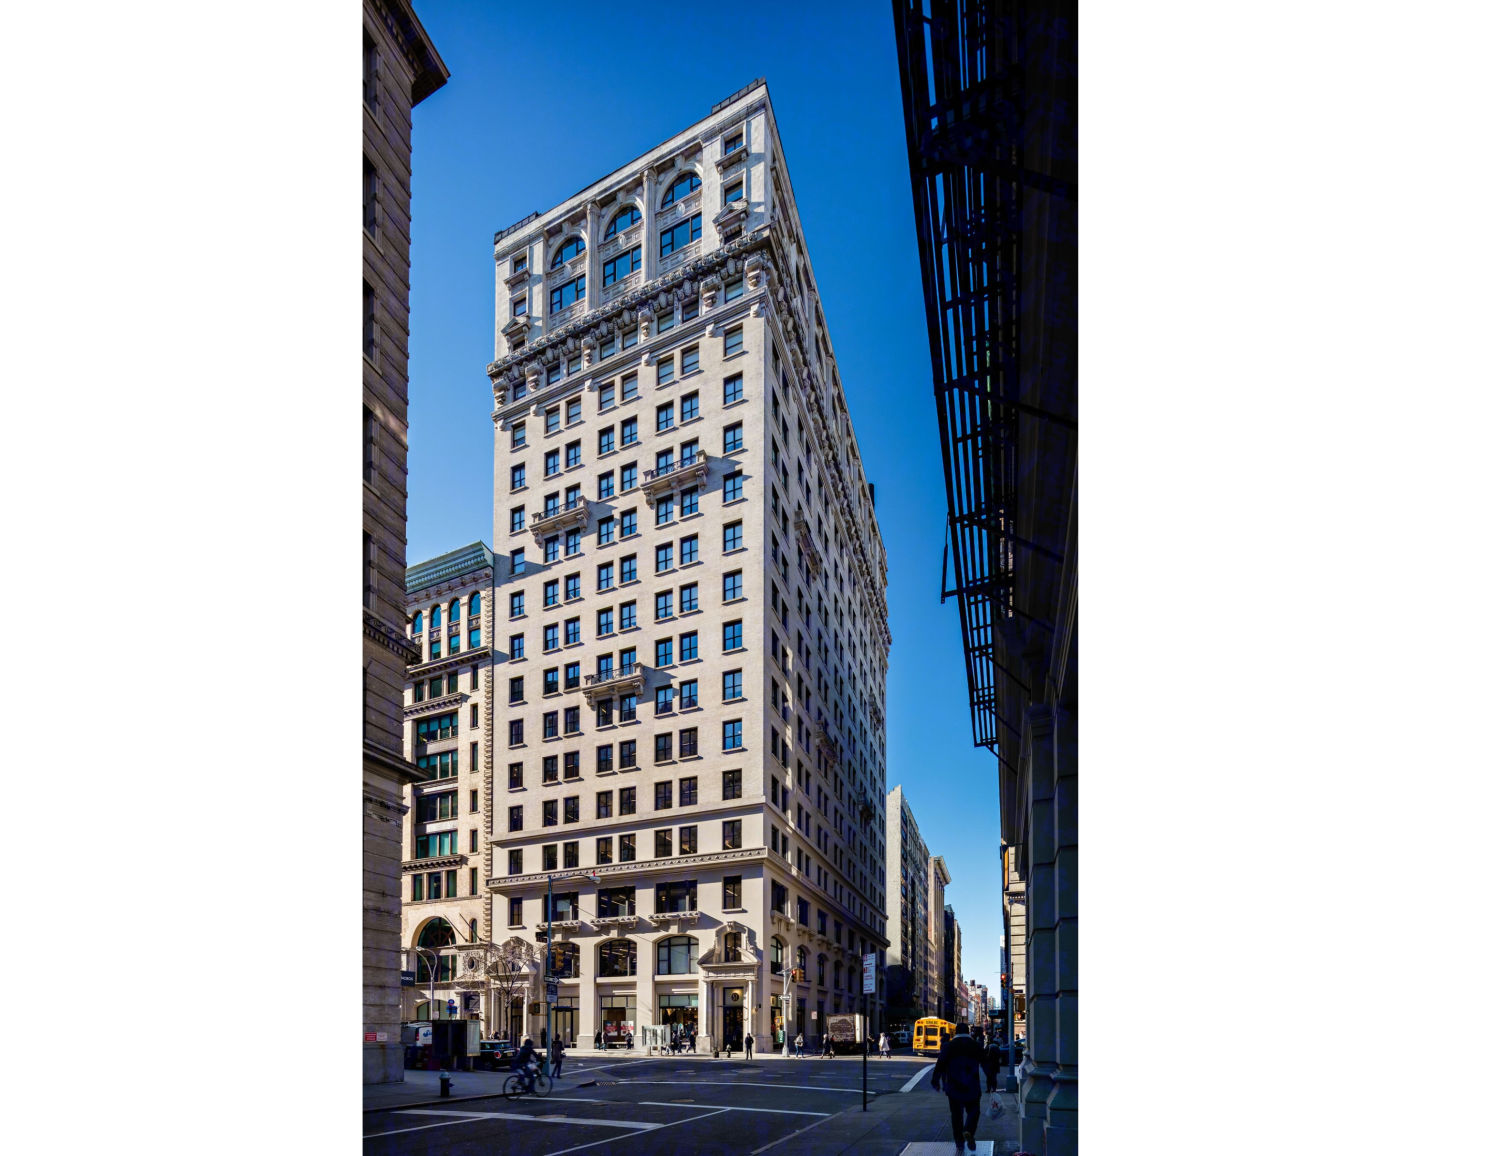 114 5th Avenue, New York, NY Commercial Space for Rent